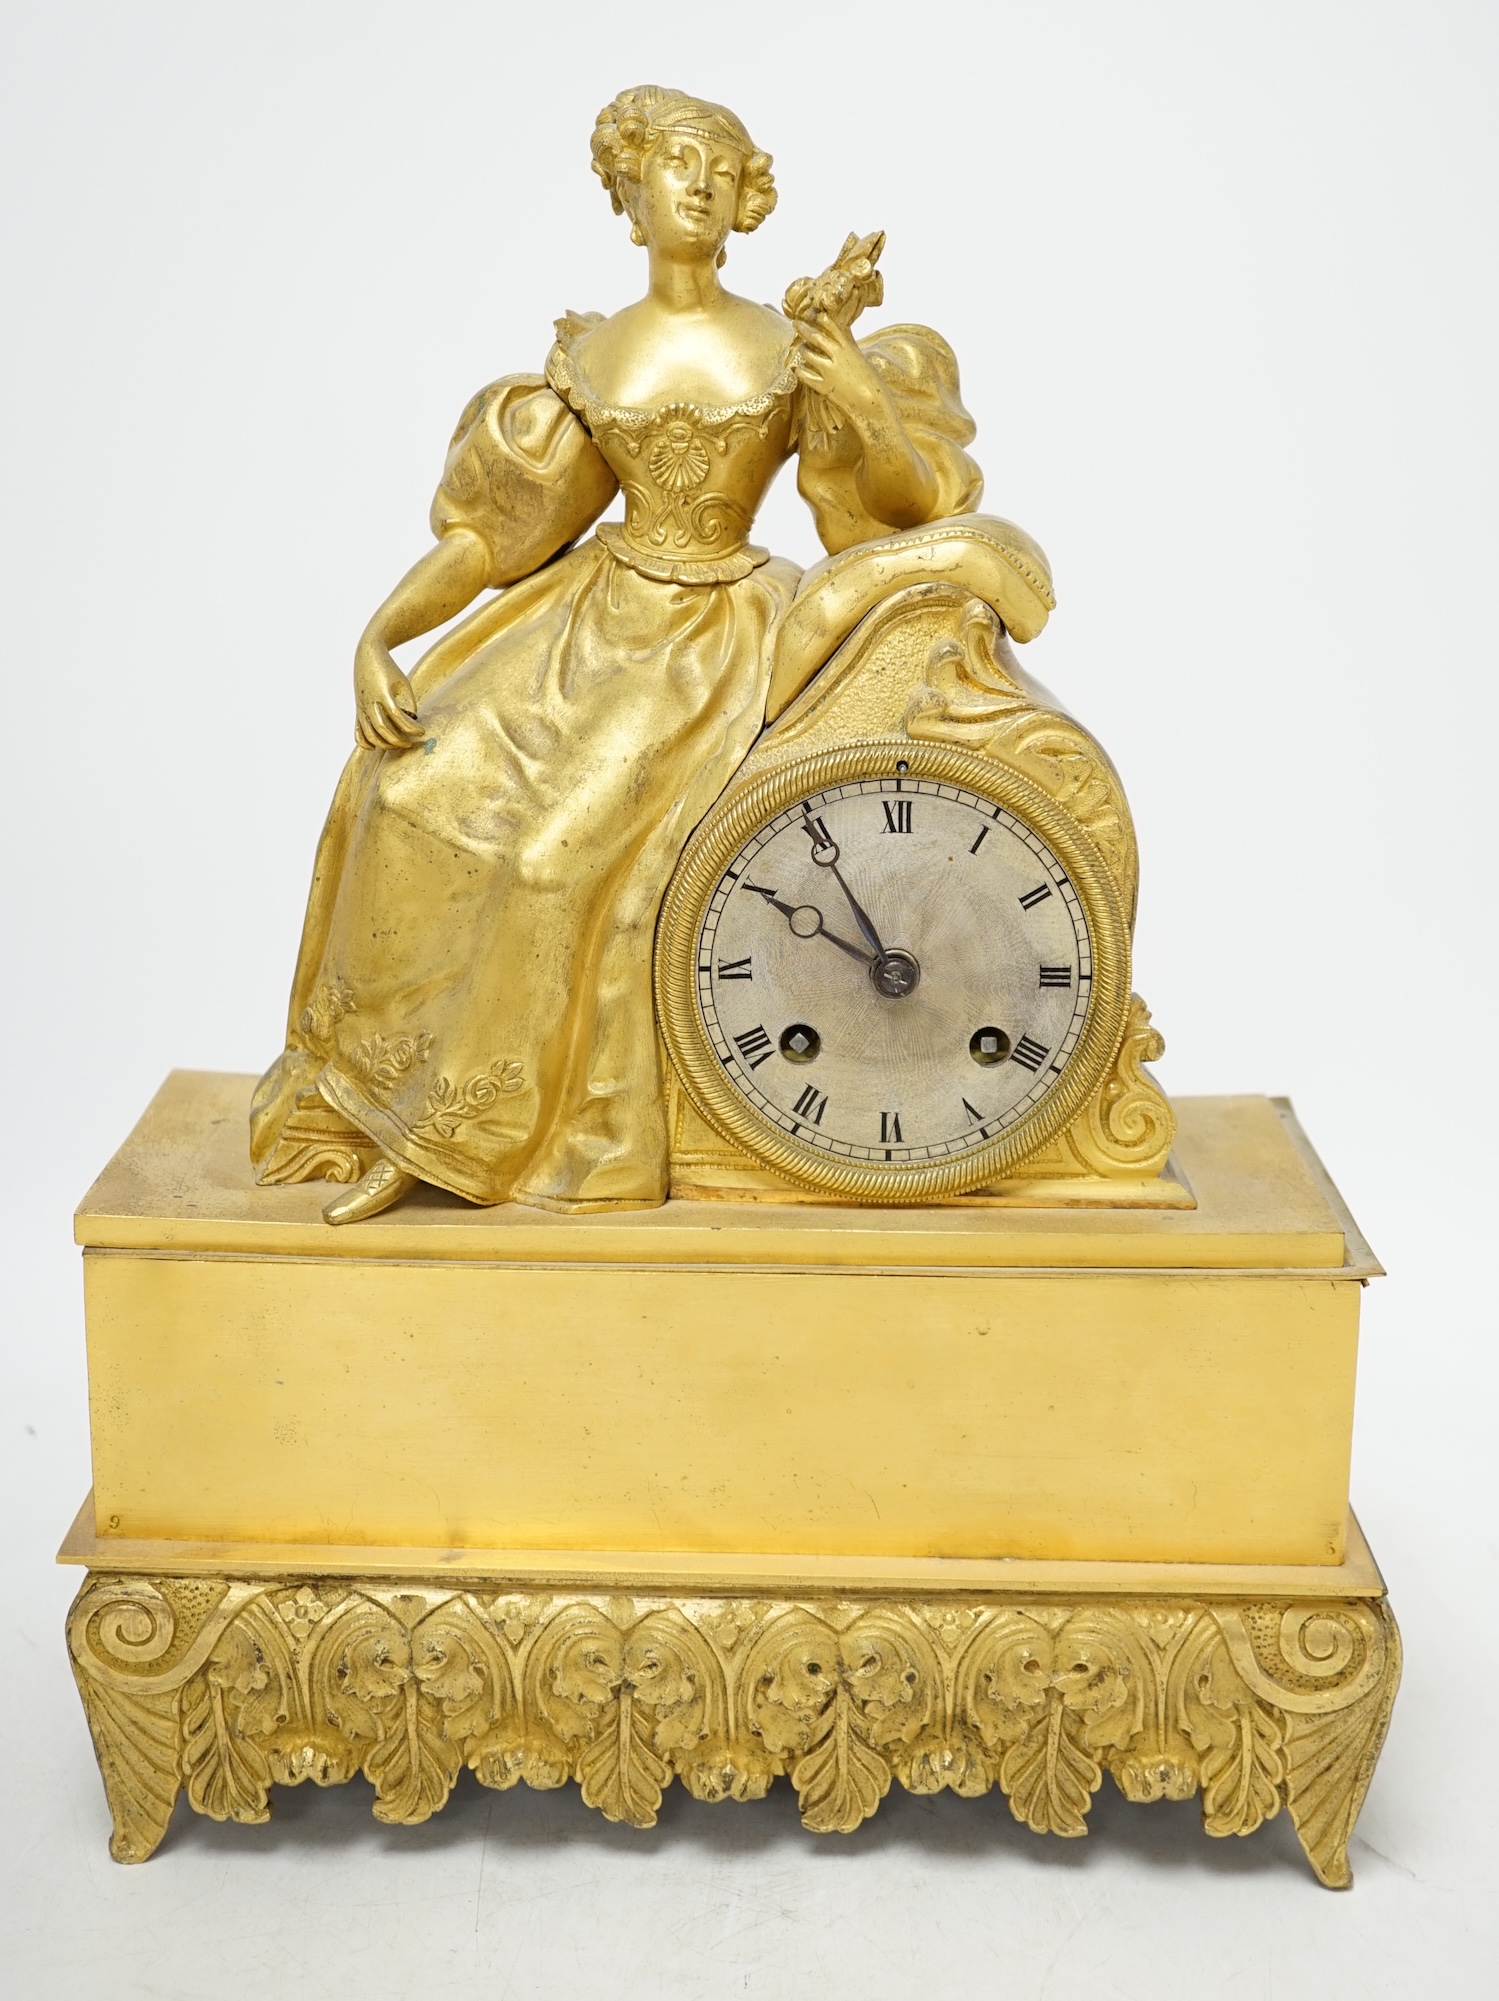 A 19th century French ormolu mantel clock, surmounted with a lady, with key and pendulum, 36cm high. Condition - poor